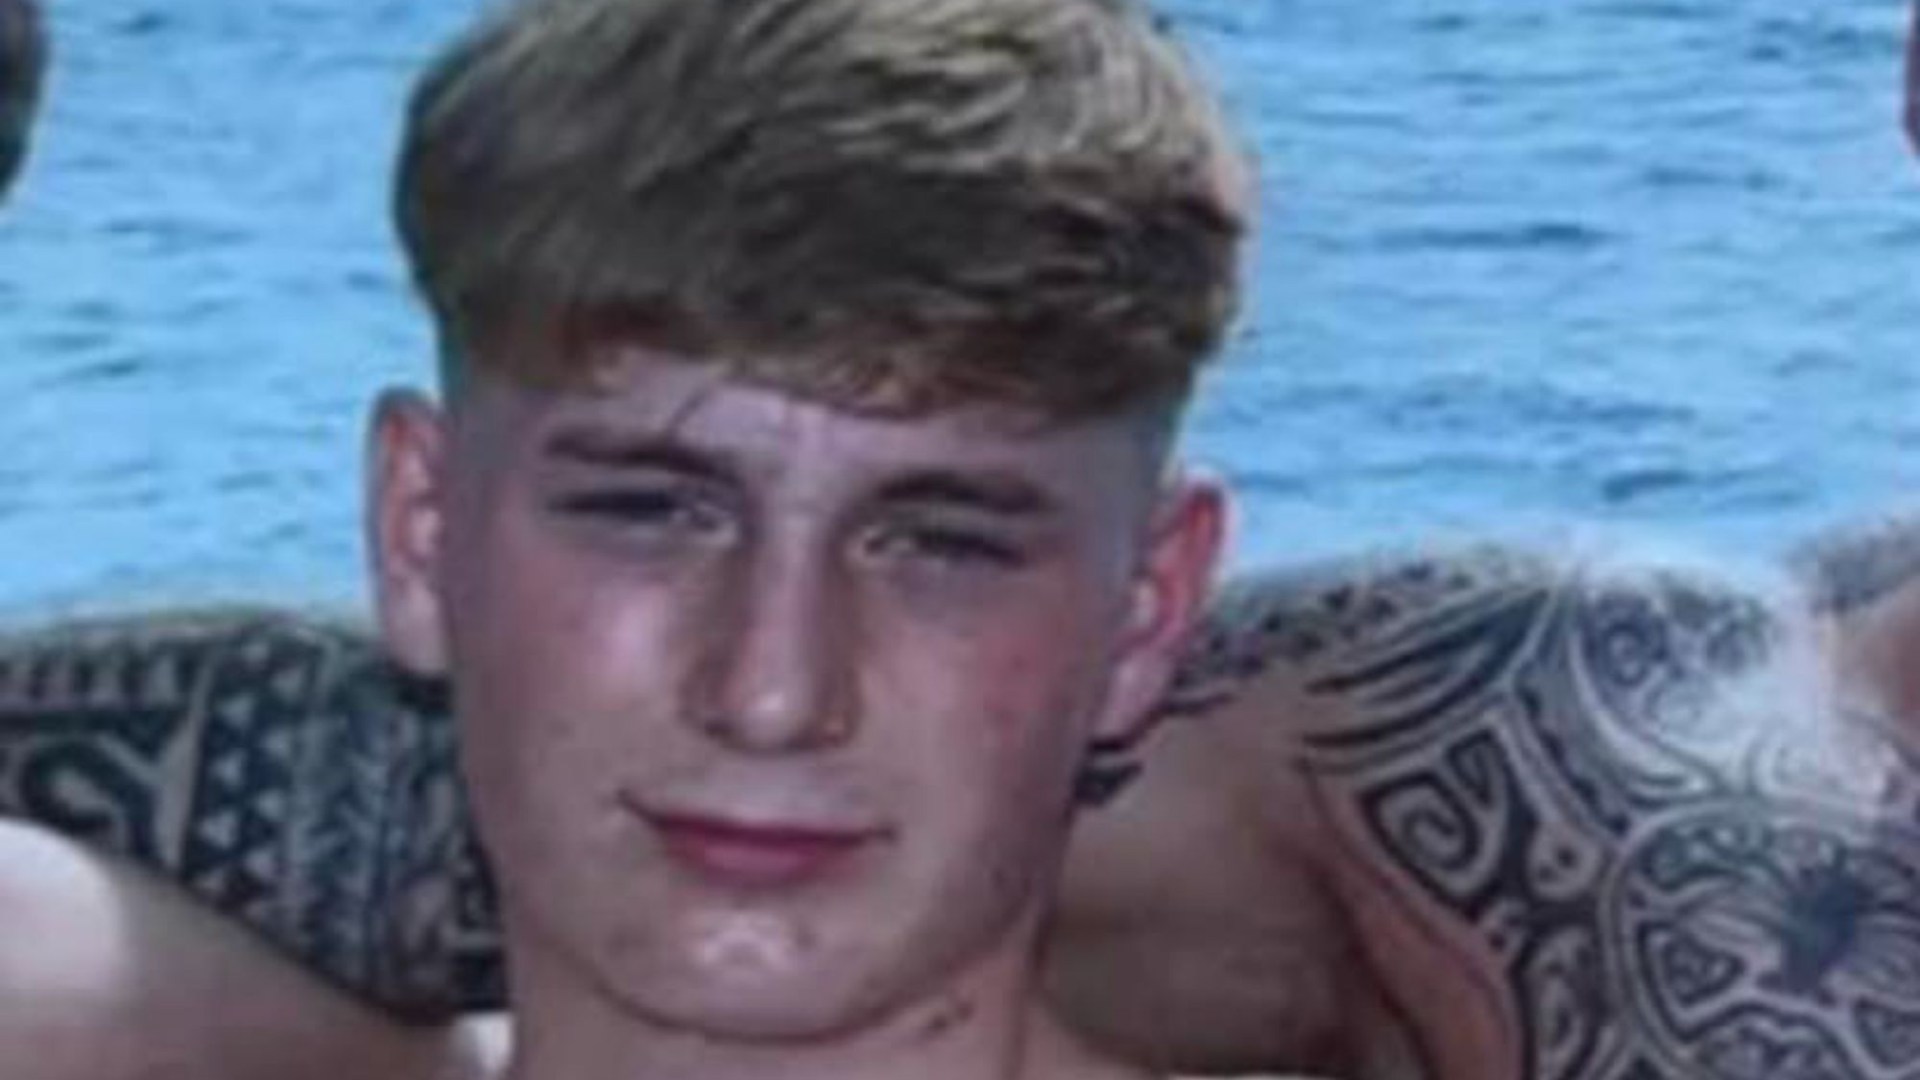 Sister’s heartbreaking tribute to ‘darling’ teen boy, 16, who was found dead in canal on hottest day of the year